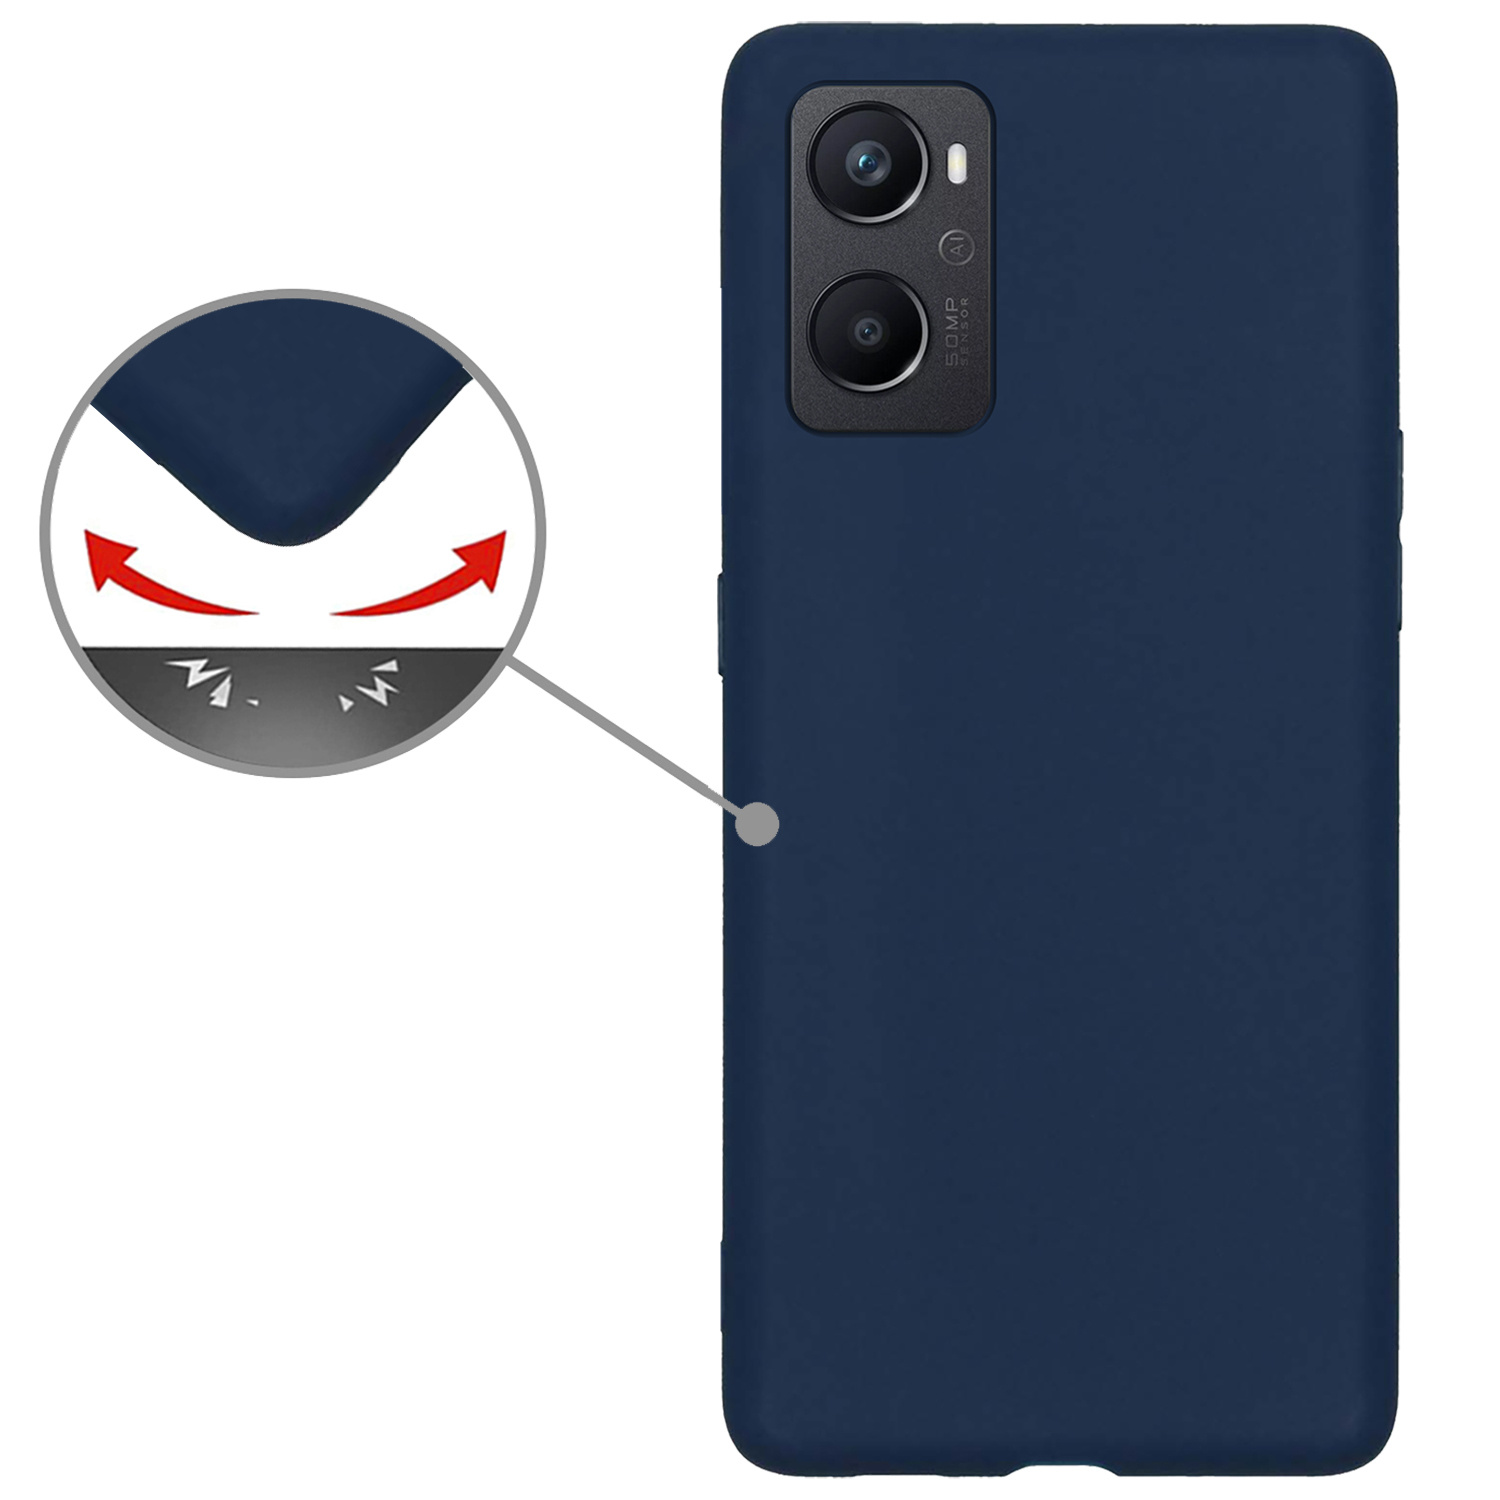 Nomfy OPPO A76 Hoesje Met Screenprotector - OPPO A76 Case Donker Blauw Siliconen - OPPO A76 Hoes Met Screenprotector